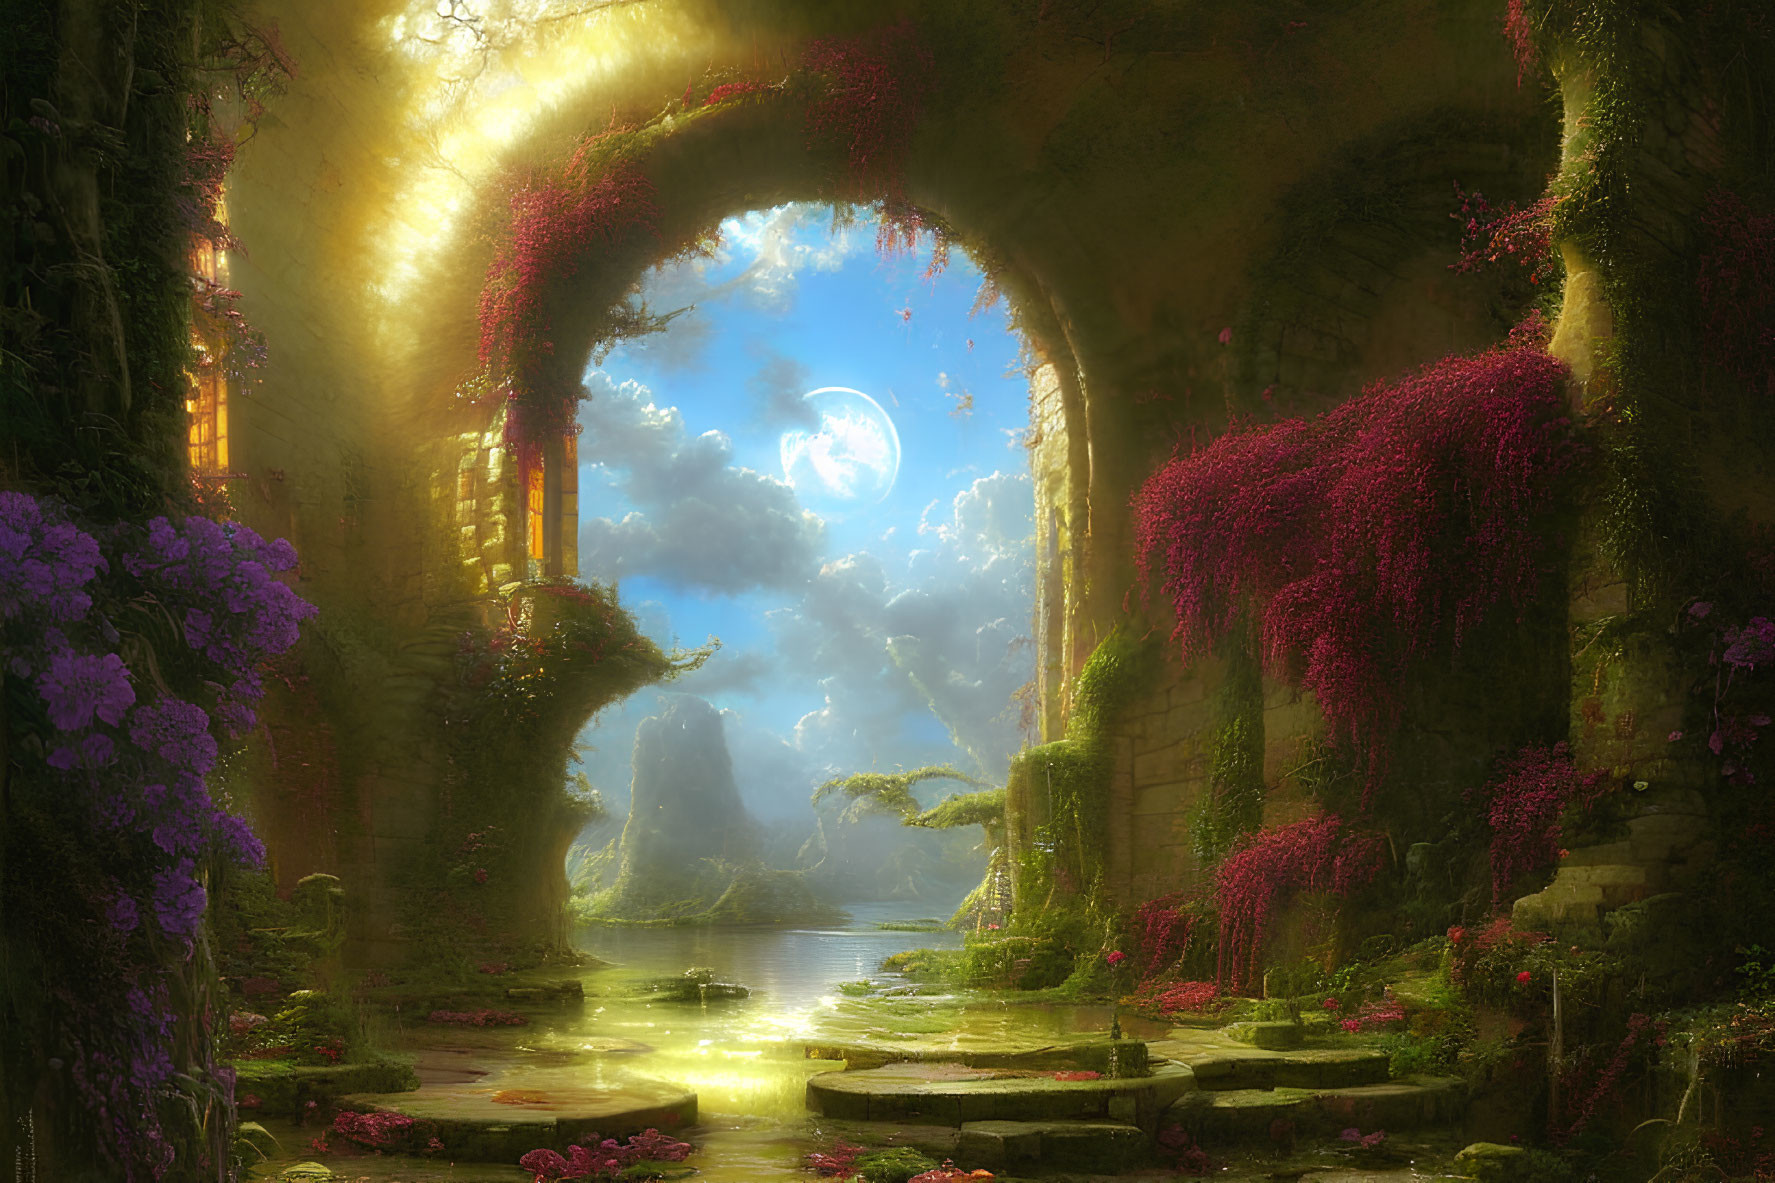 Tranquil Fantasy Landscape with Overgrown Archway and Moonlit Sky